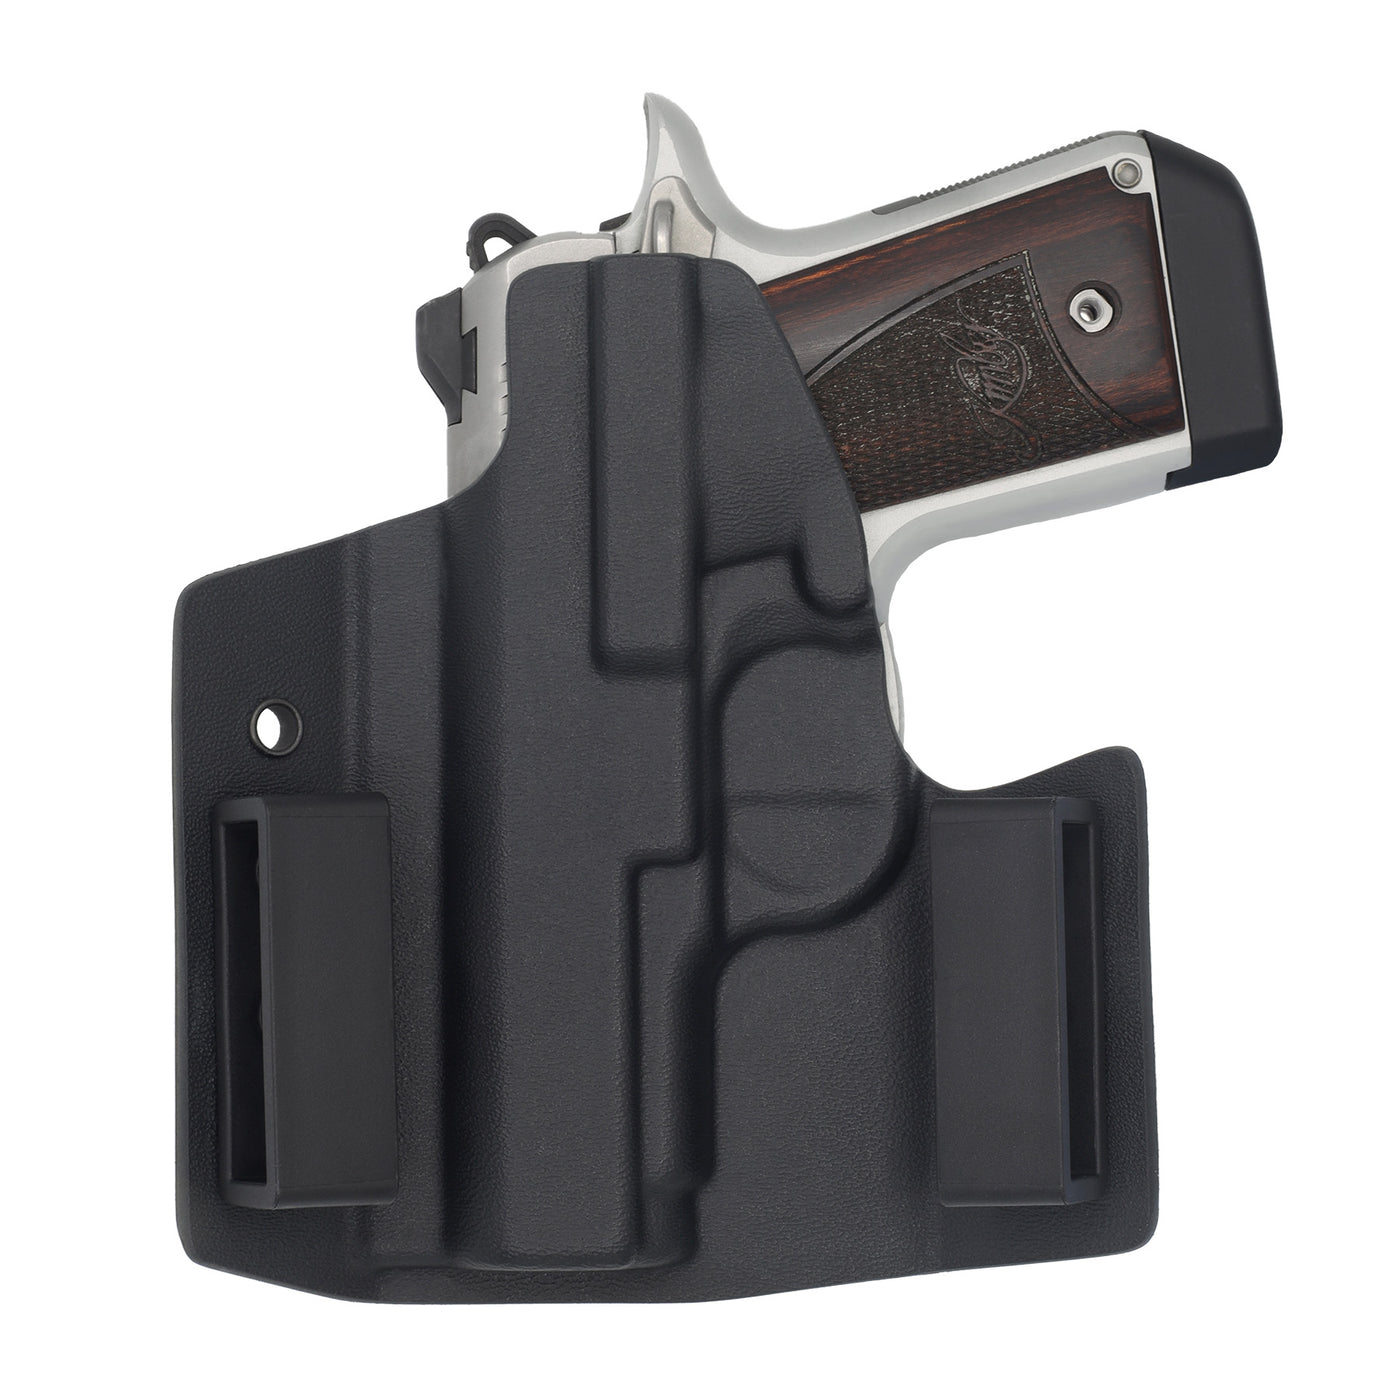 C&G Holsters OWB Outside the waistband Holster for the Kimber Micro 9